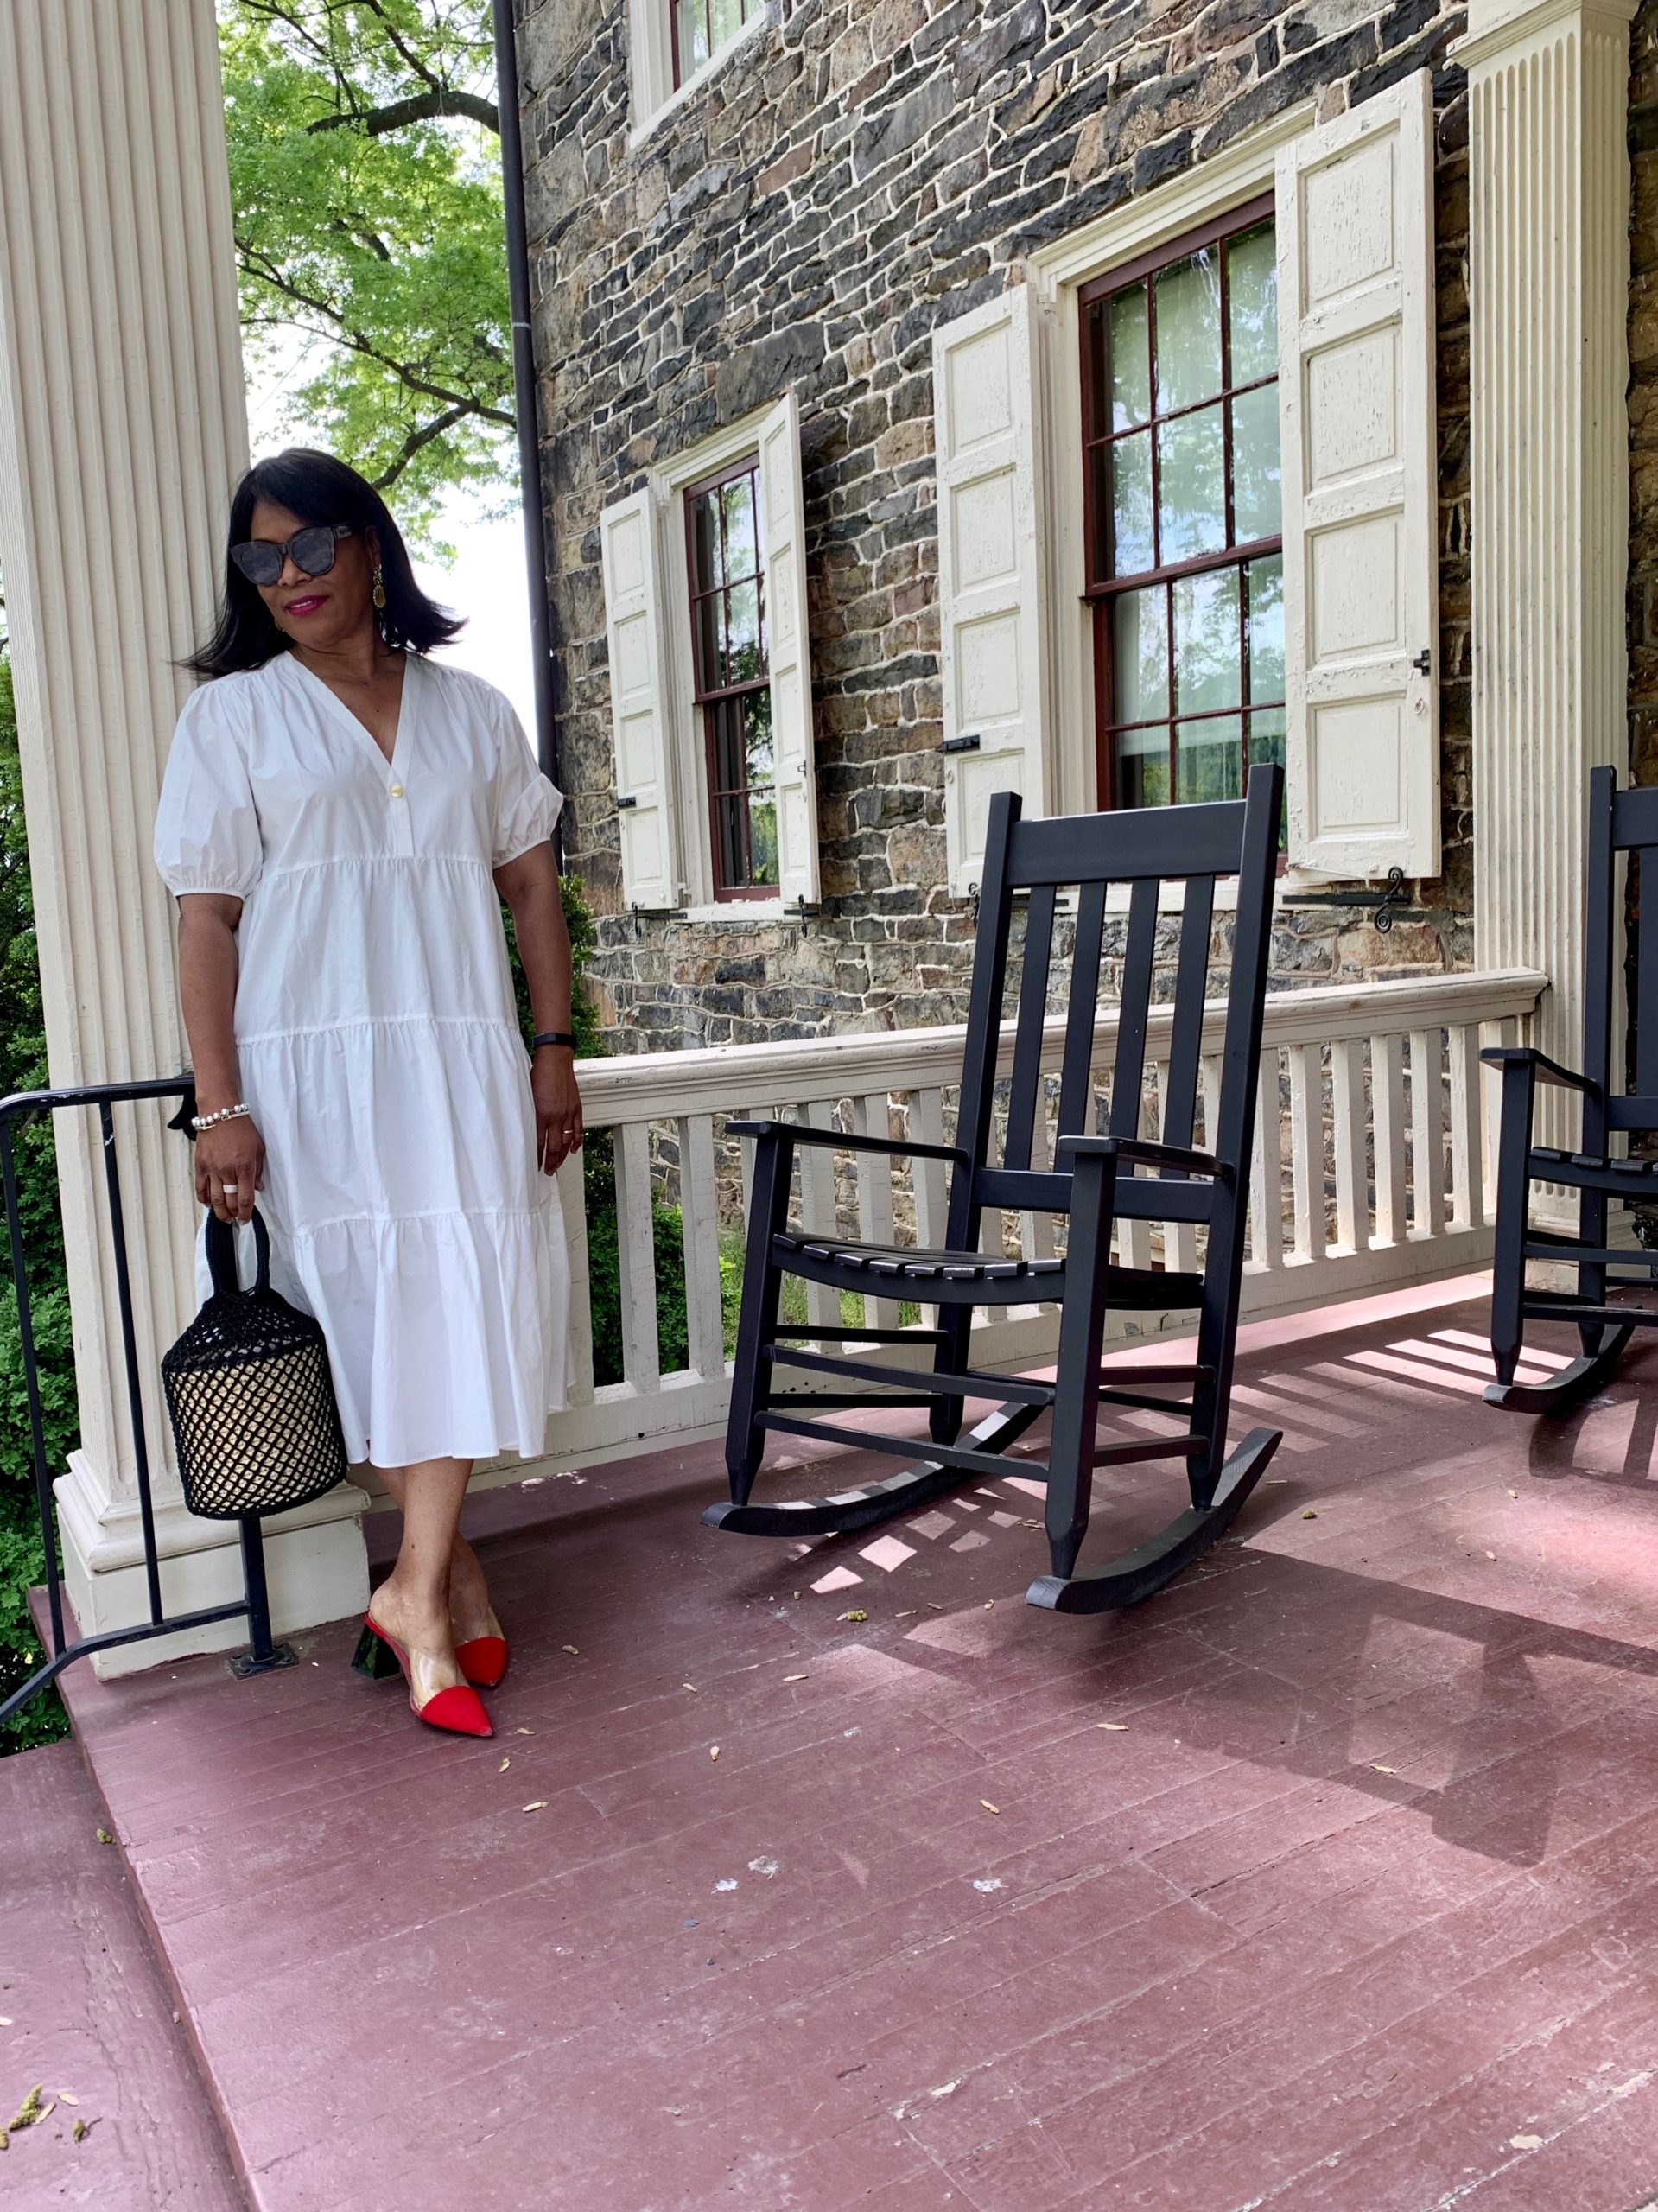 Historic Fort Hunter Mansion; Christian Siriano Put Fashion on the Frontline